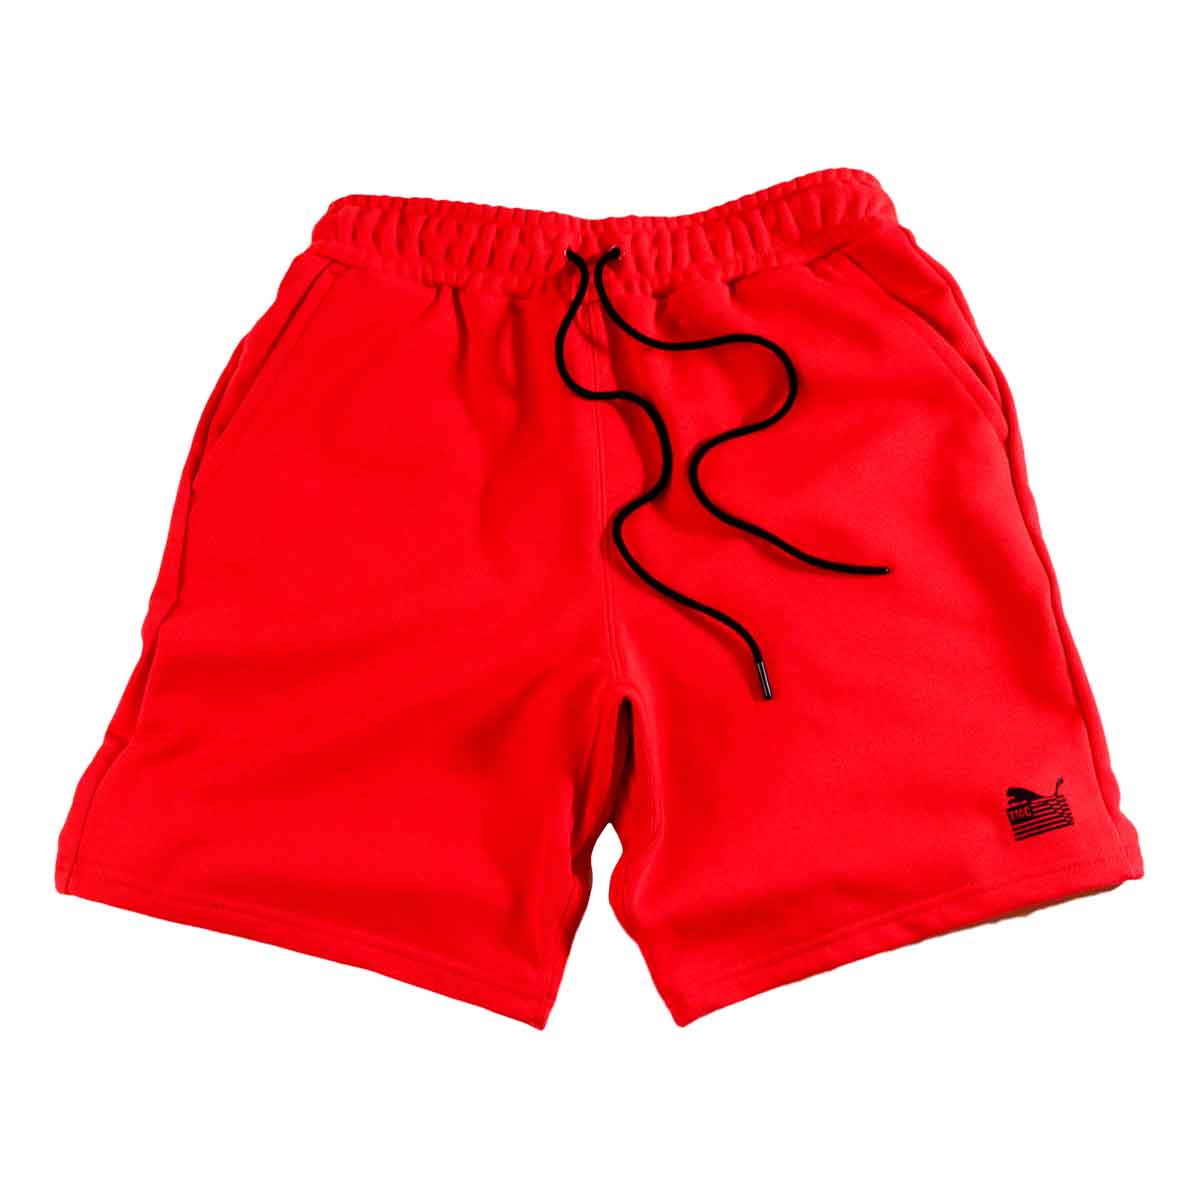 PUMA x TMC Everyday Hussle Collection Sweat Shorts - Red